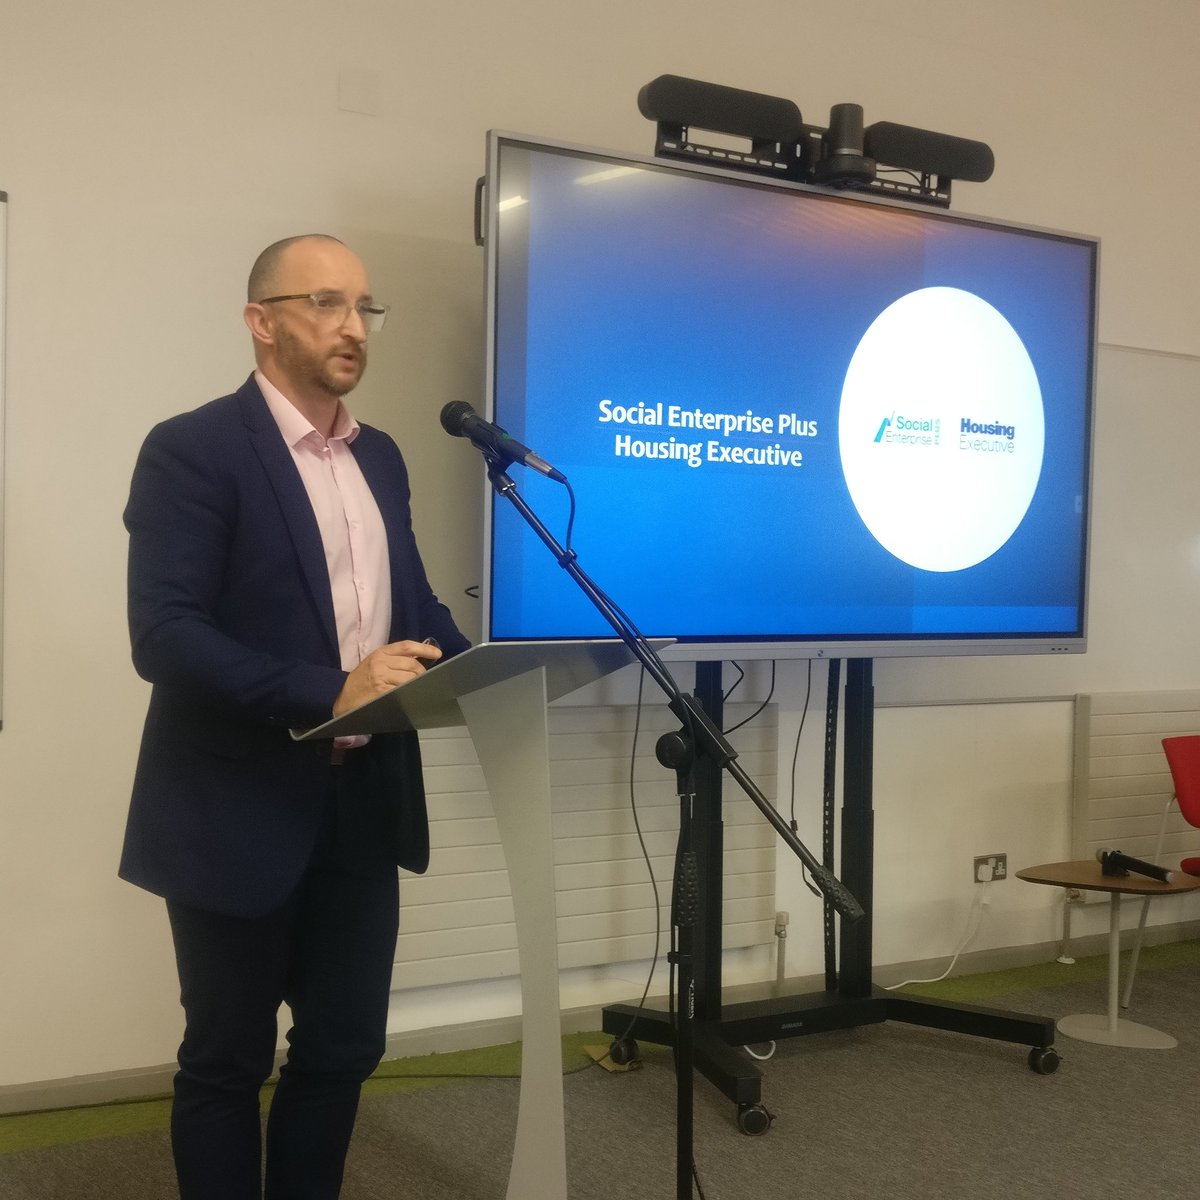 Another busy day joining the panel to discuss all things social enterprise @NRCCollege and #profitwithpurpose. Thank you for the invitation to take part and listen to @JohnSocEnt and Connor from @nihecommunity Delighted to see so many students in the room interested in Soc Ent